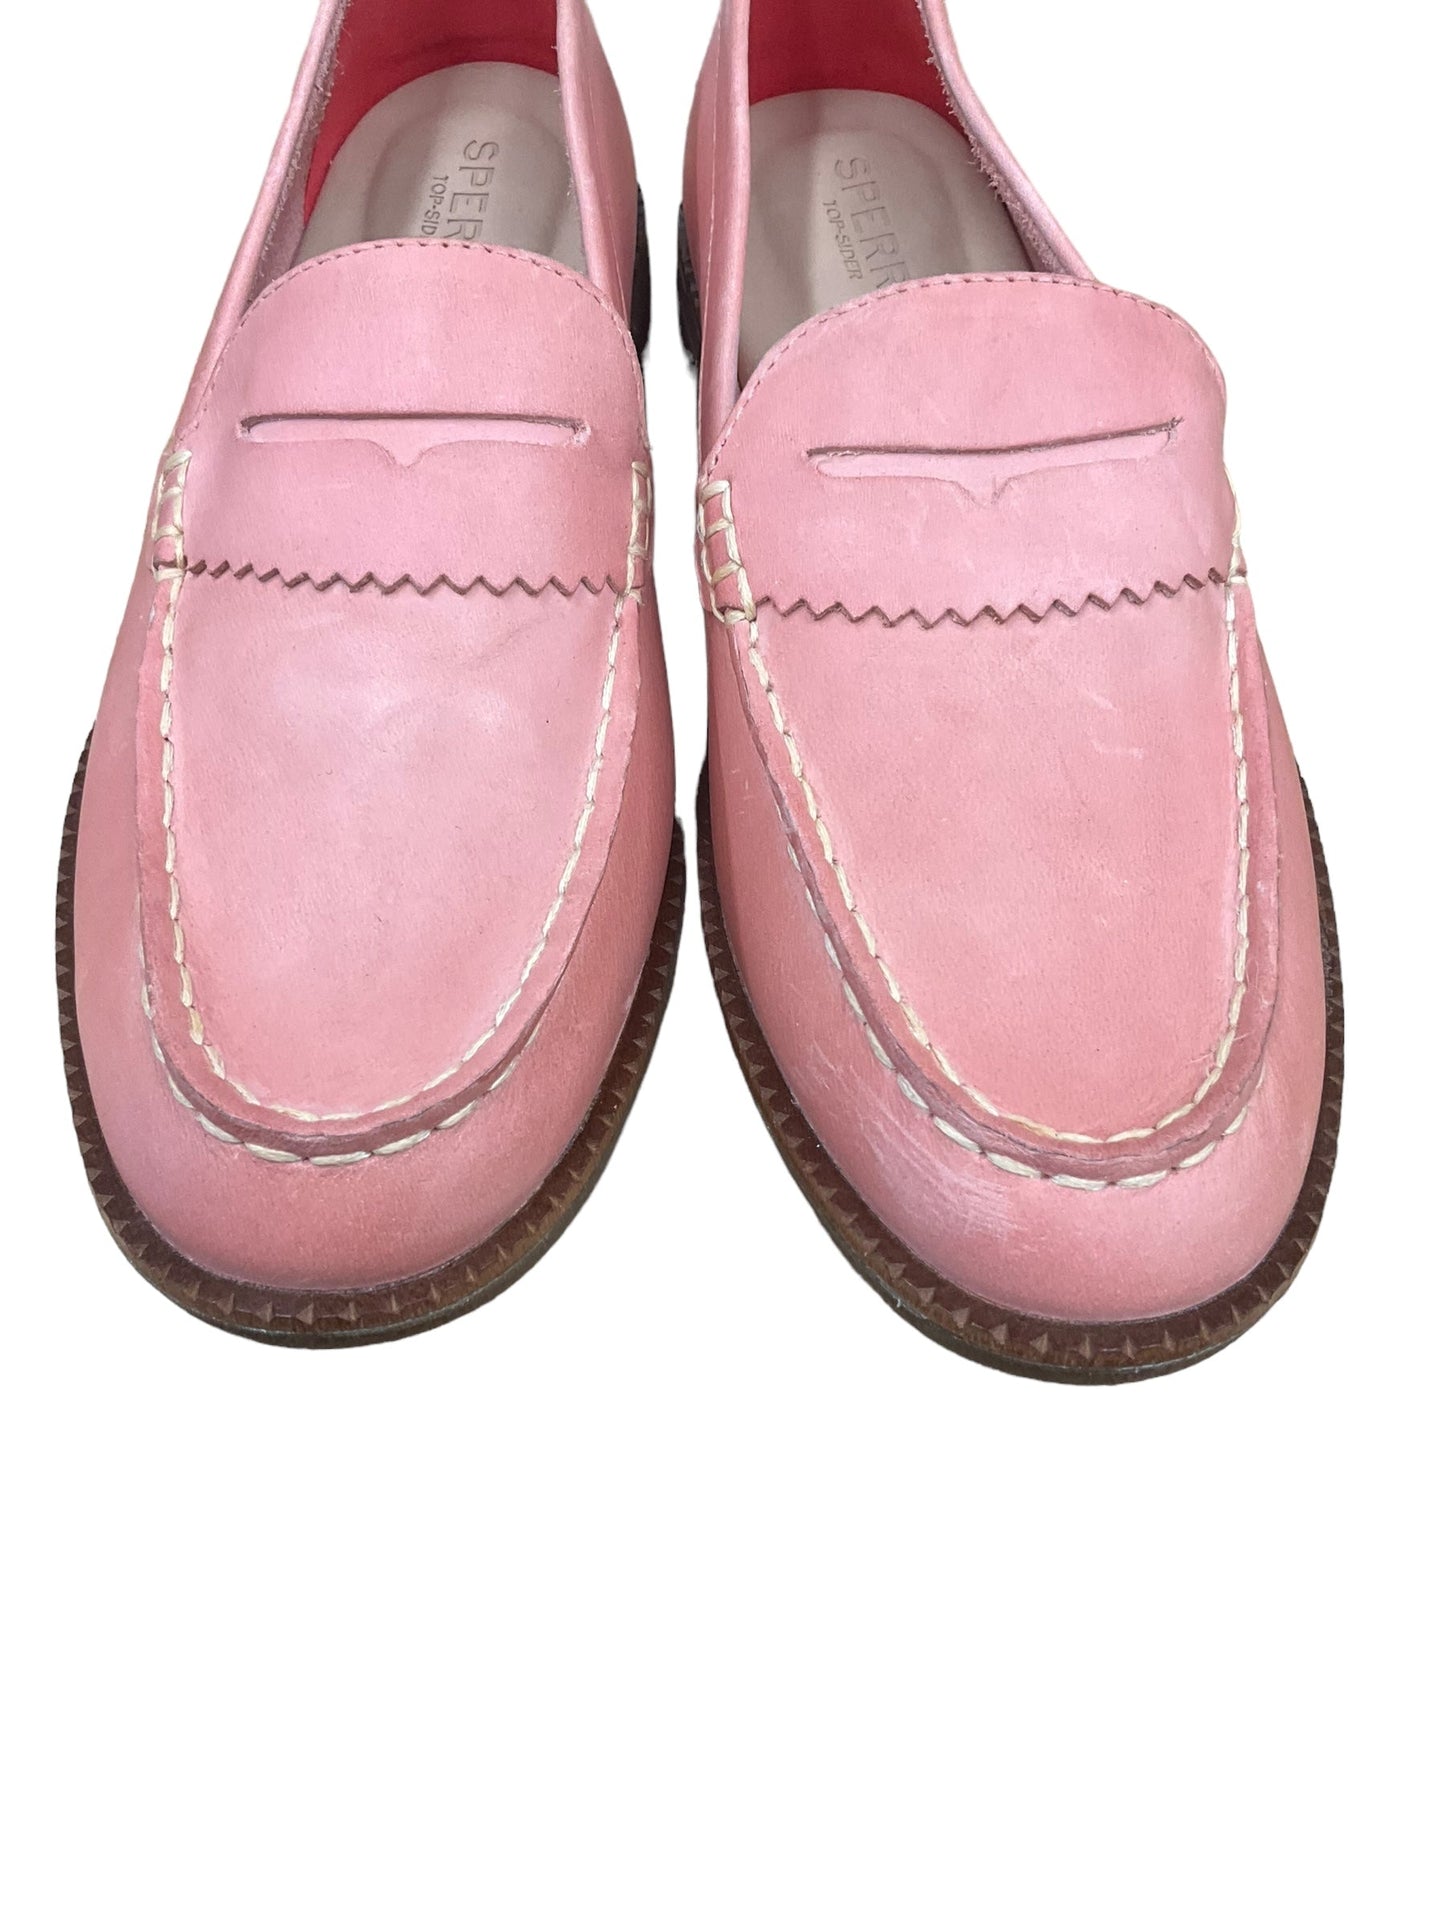 Pink Shoes Flats Sperry, Size 8